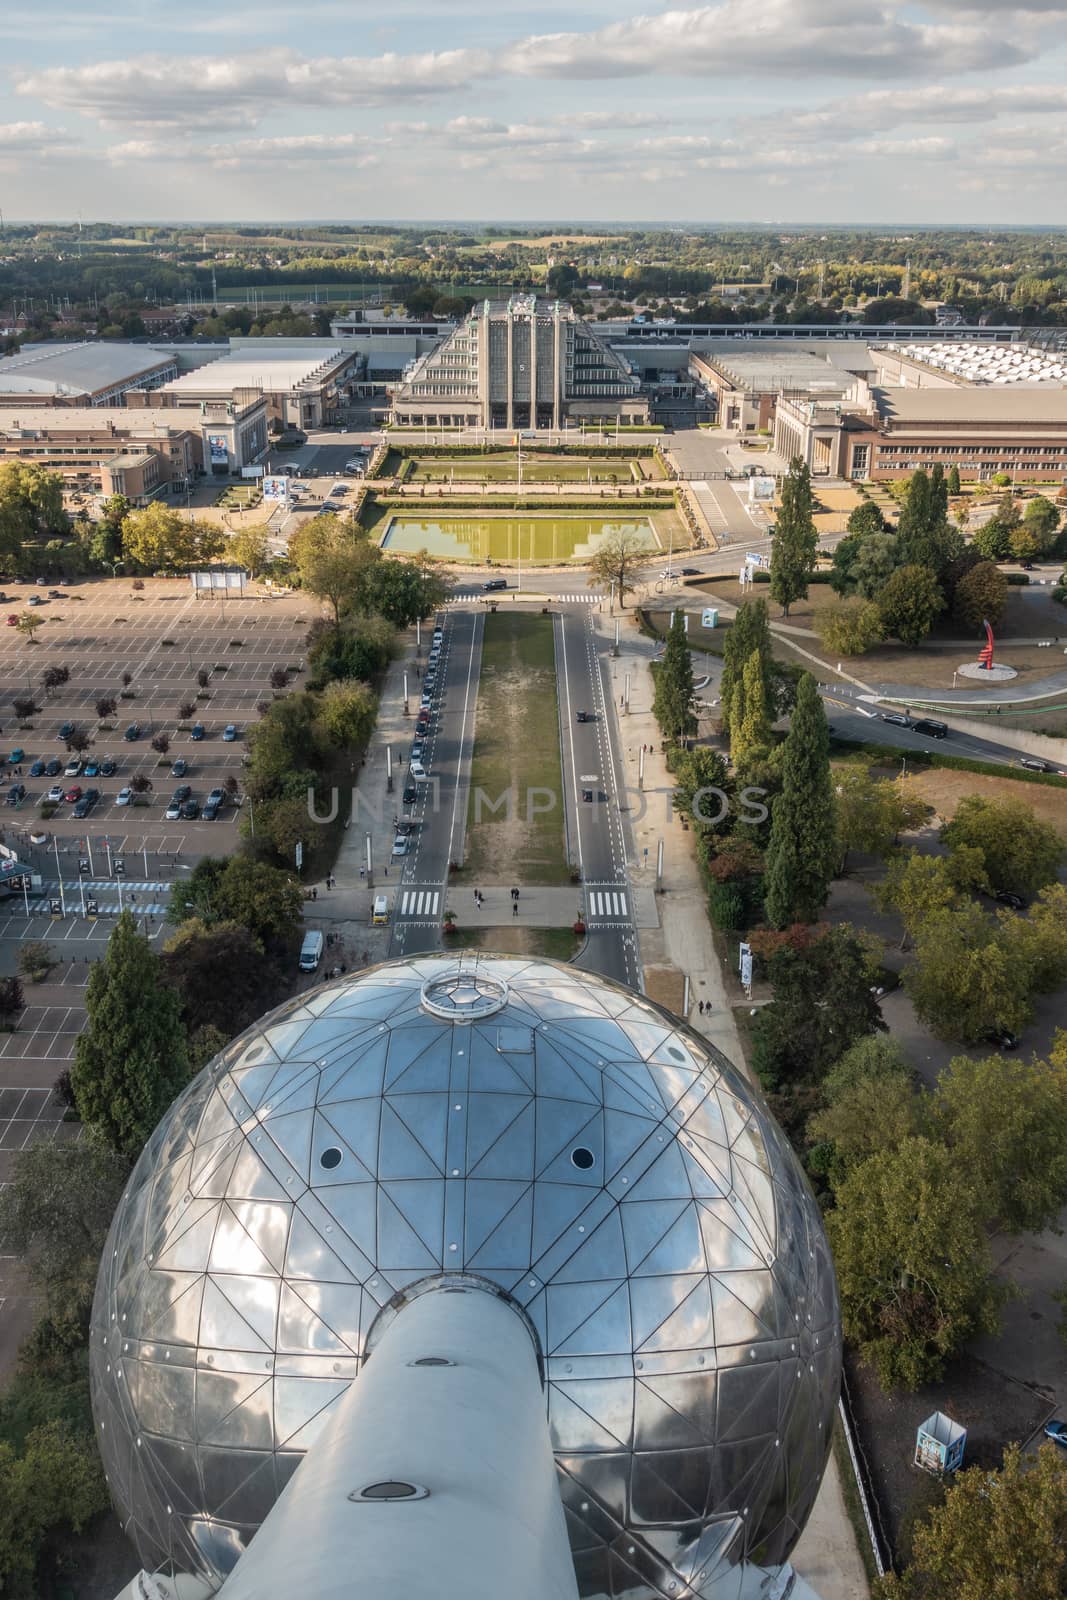 Historic world expo halls in Brussels and one Atomium sphere, Be by Claudine